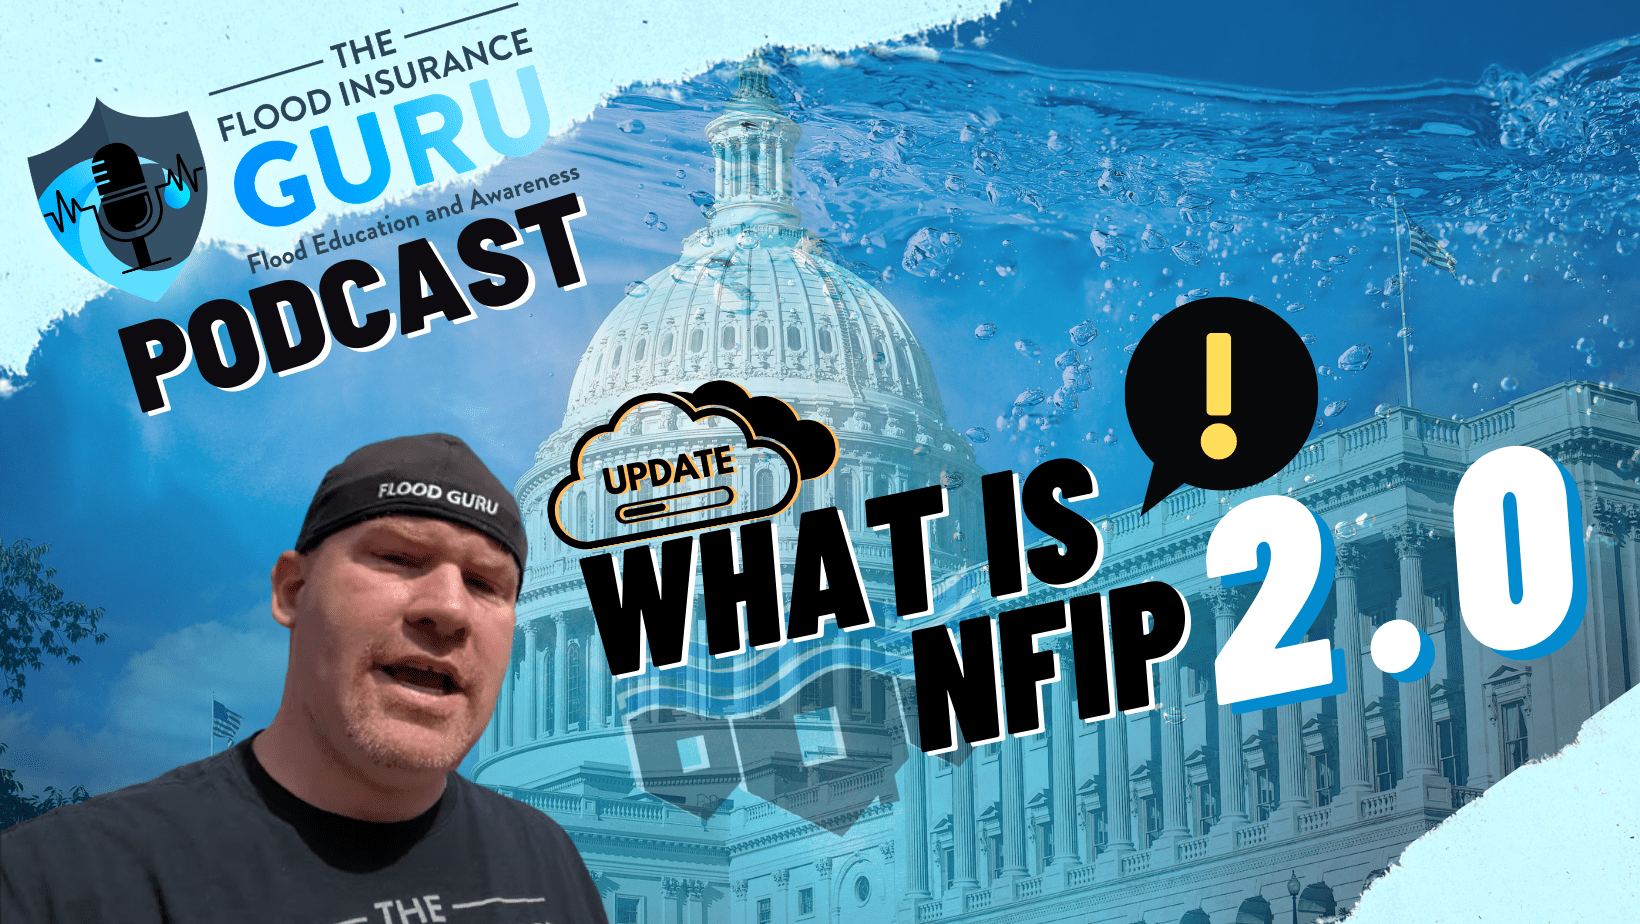 The Flood Insurance Guru | Podcast | Episode 6 | What is NFIP 2.0?